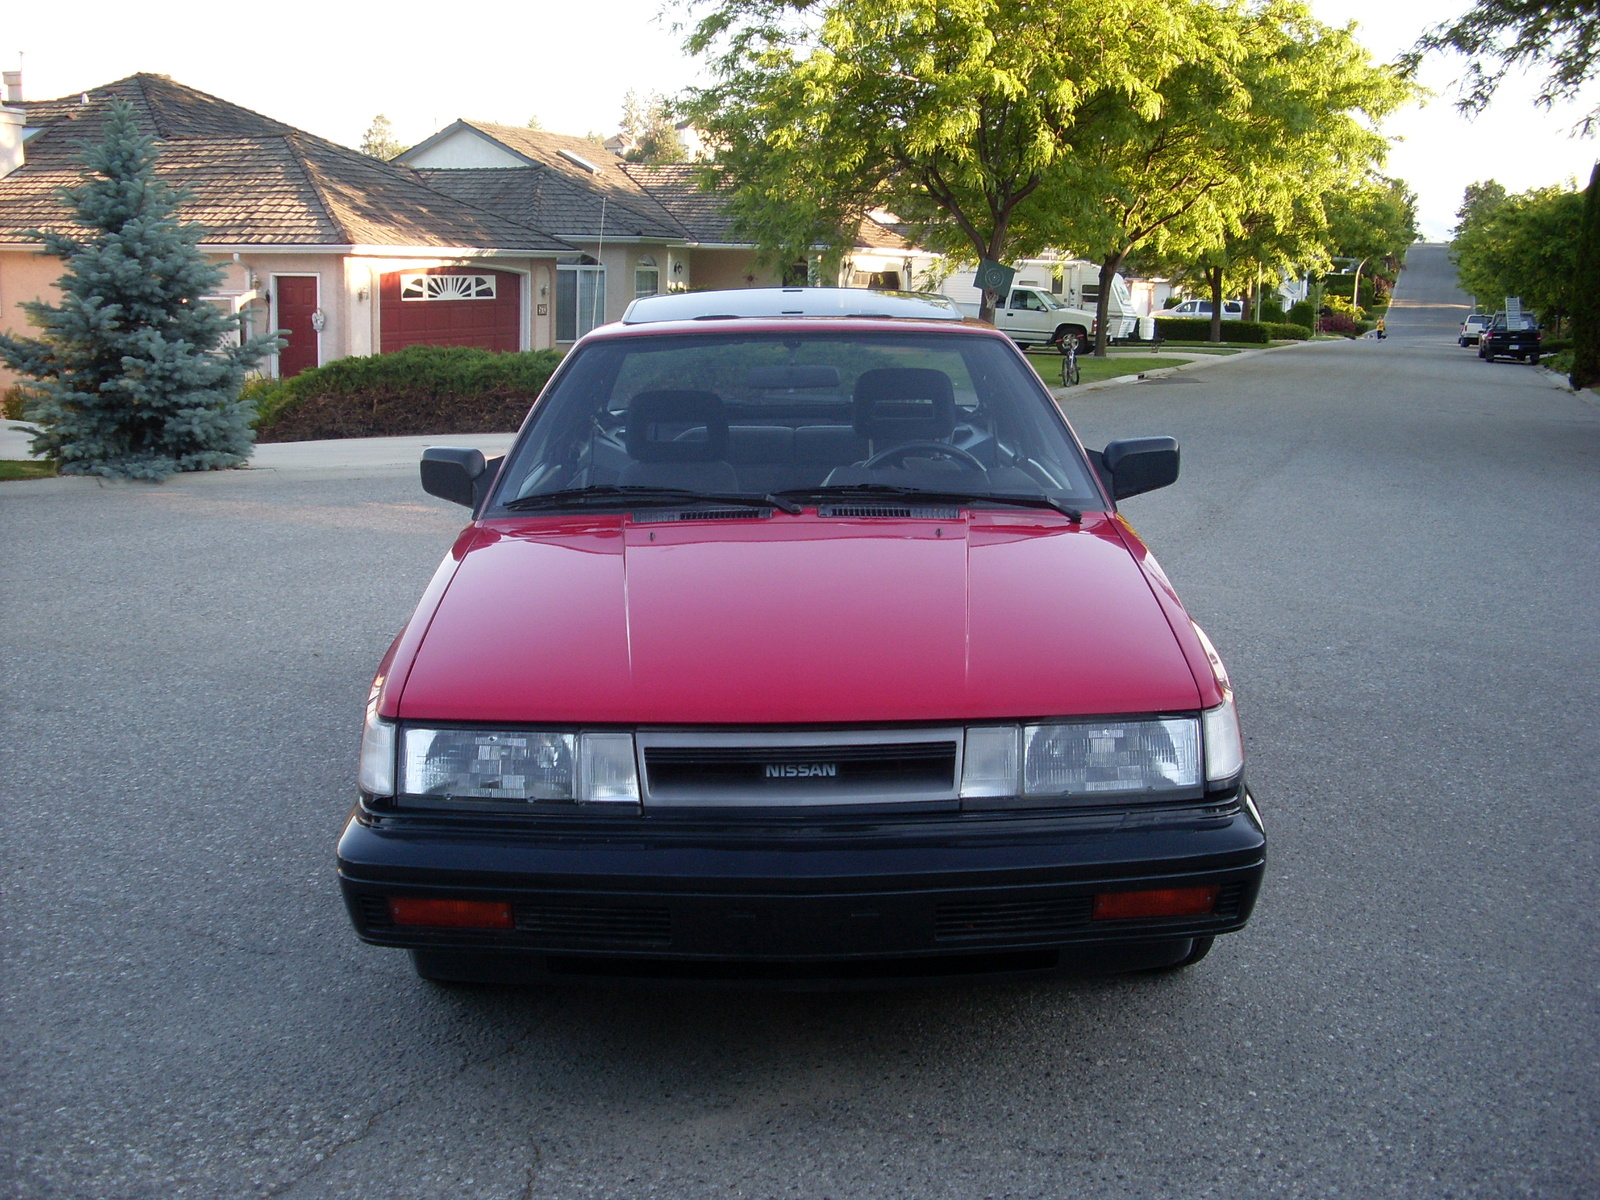 1989 Nissan sentra coupe review #7